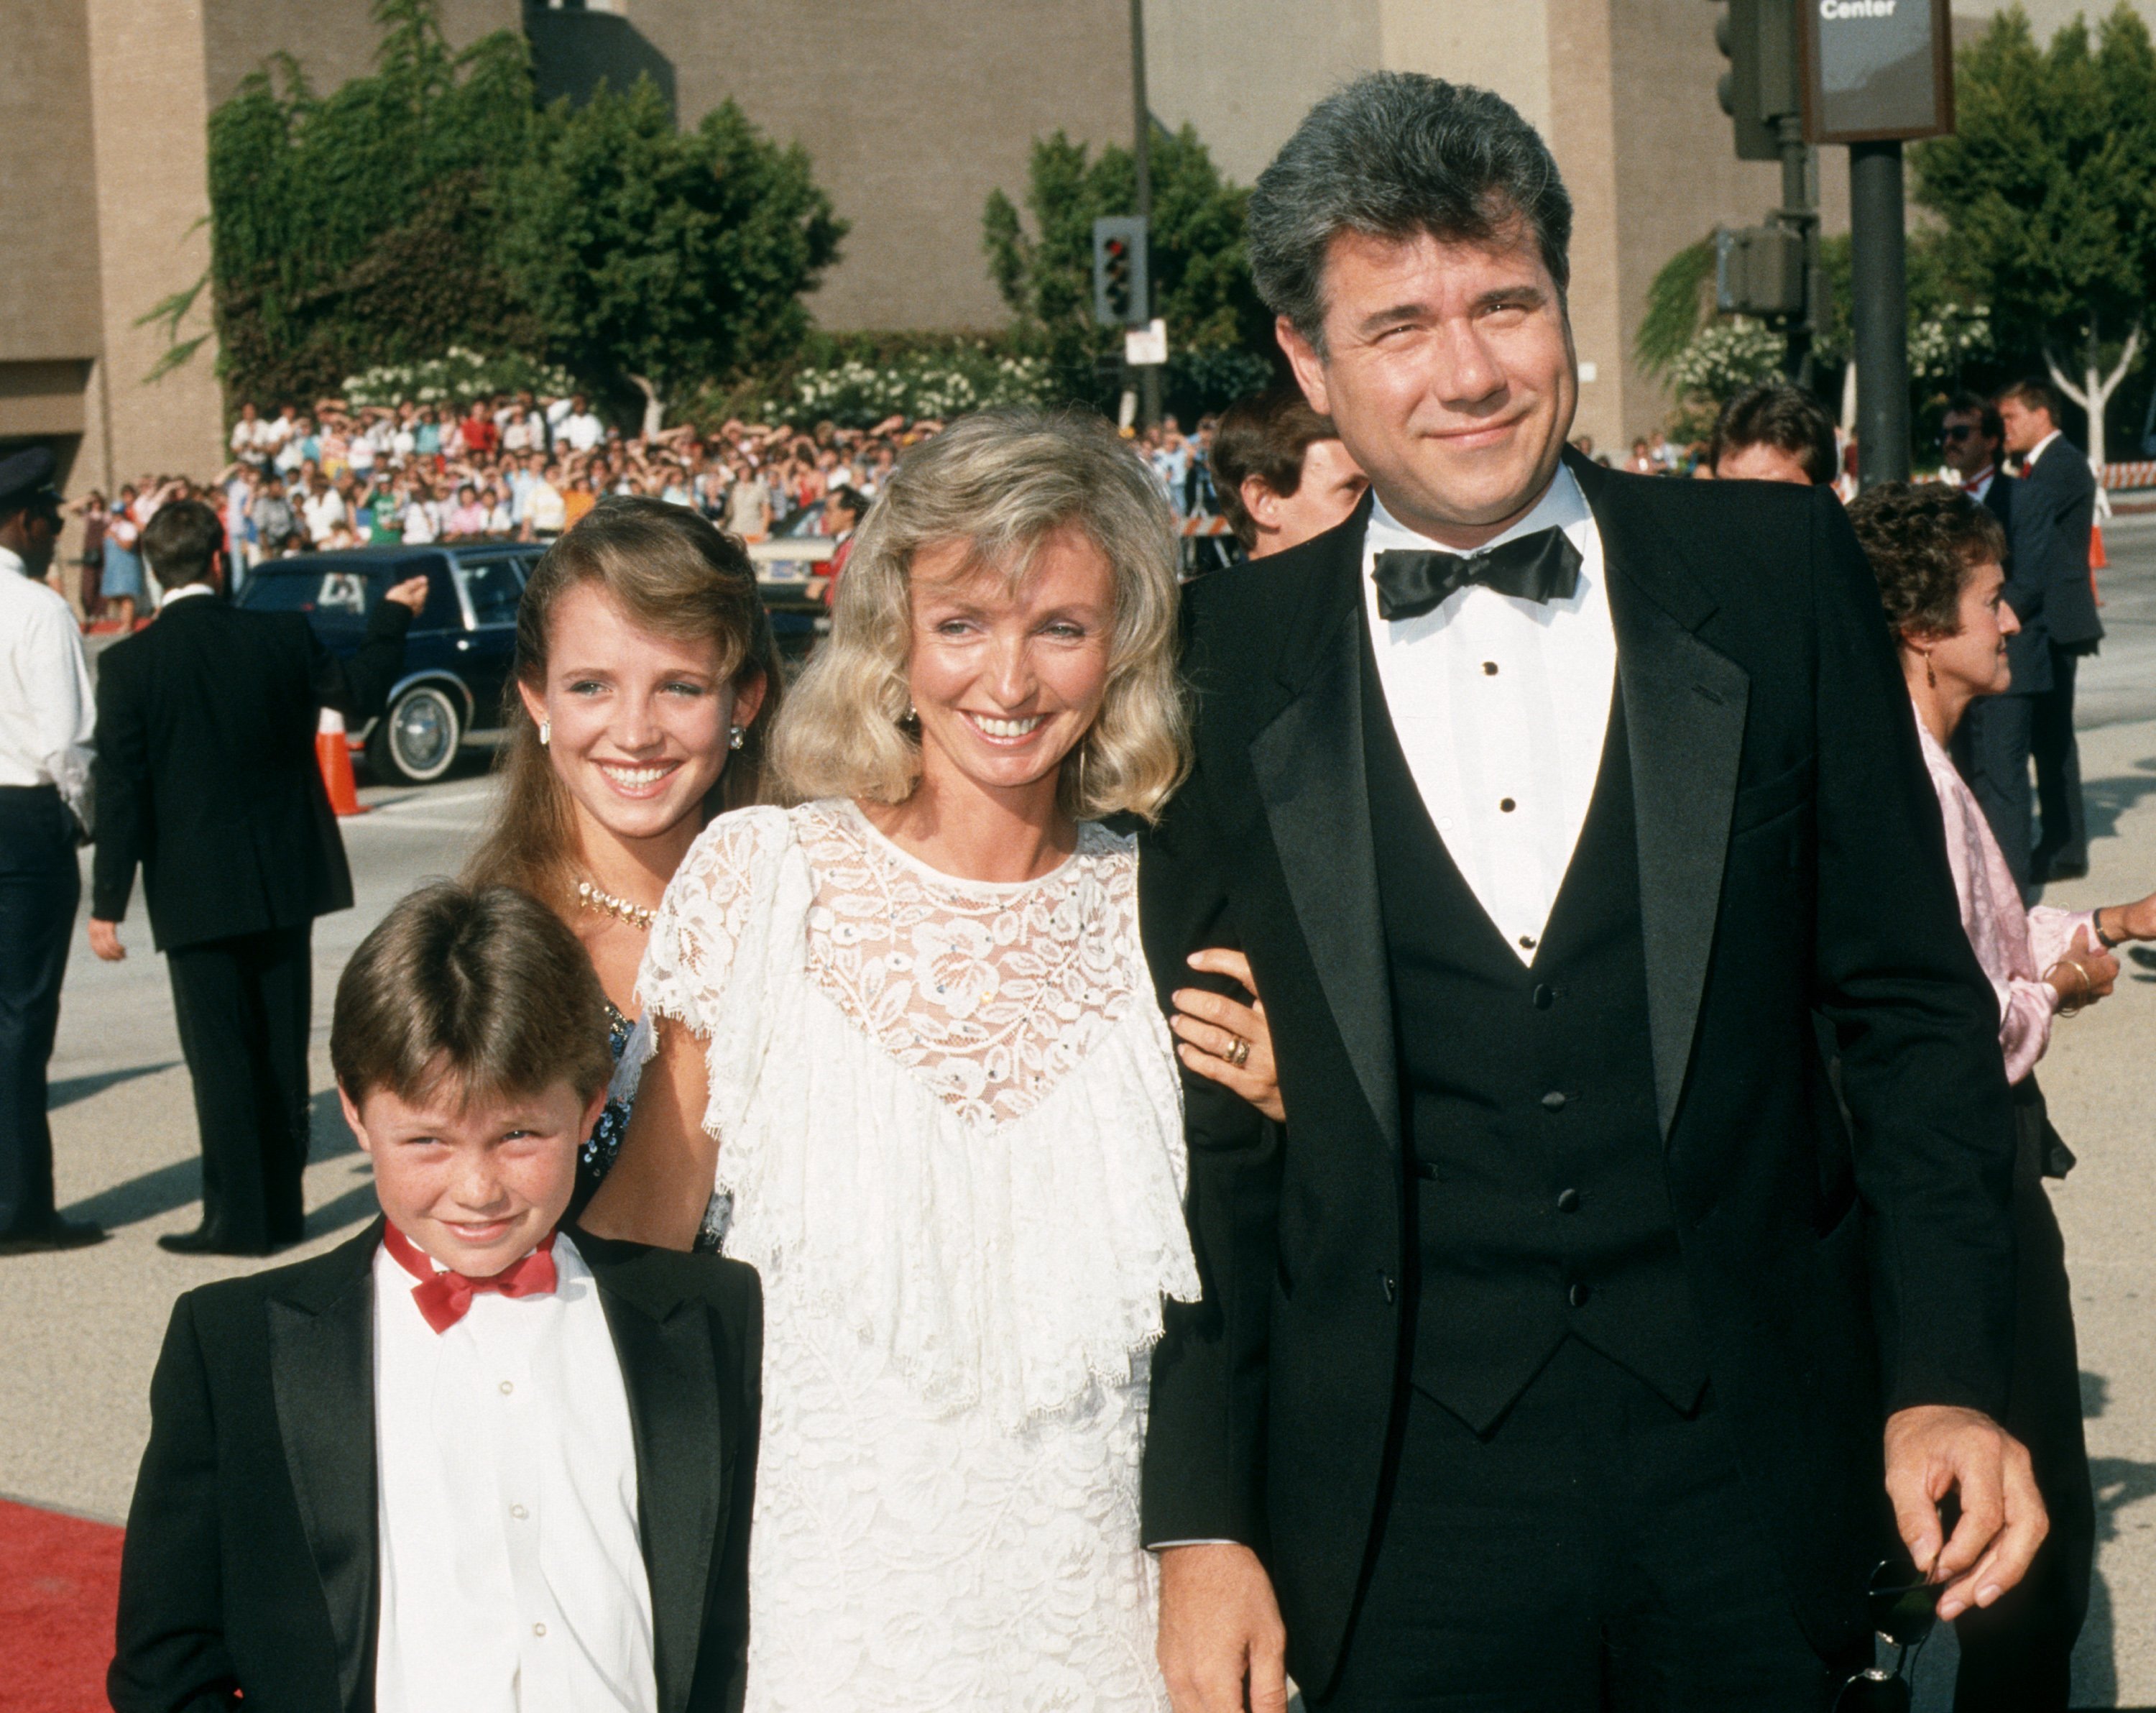 John Larroquette, Elizabeth Cookson, Lisa Laurraquette, and Jonathan Larroquette at the 38th Annual Primetime Emmy Awards on September 21, 1986, in Pasadena, California | Source: Getty Images